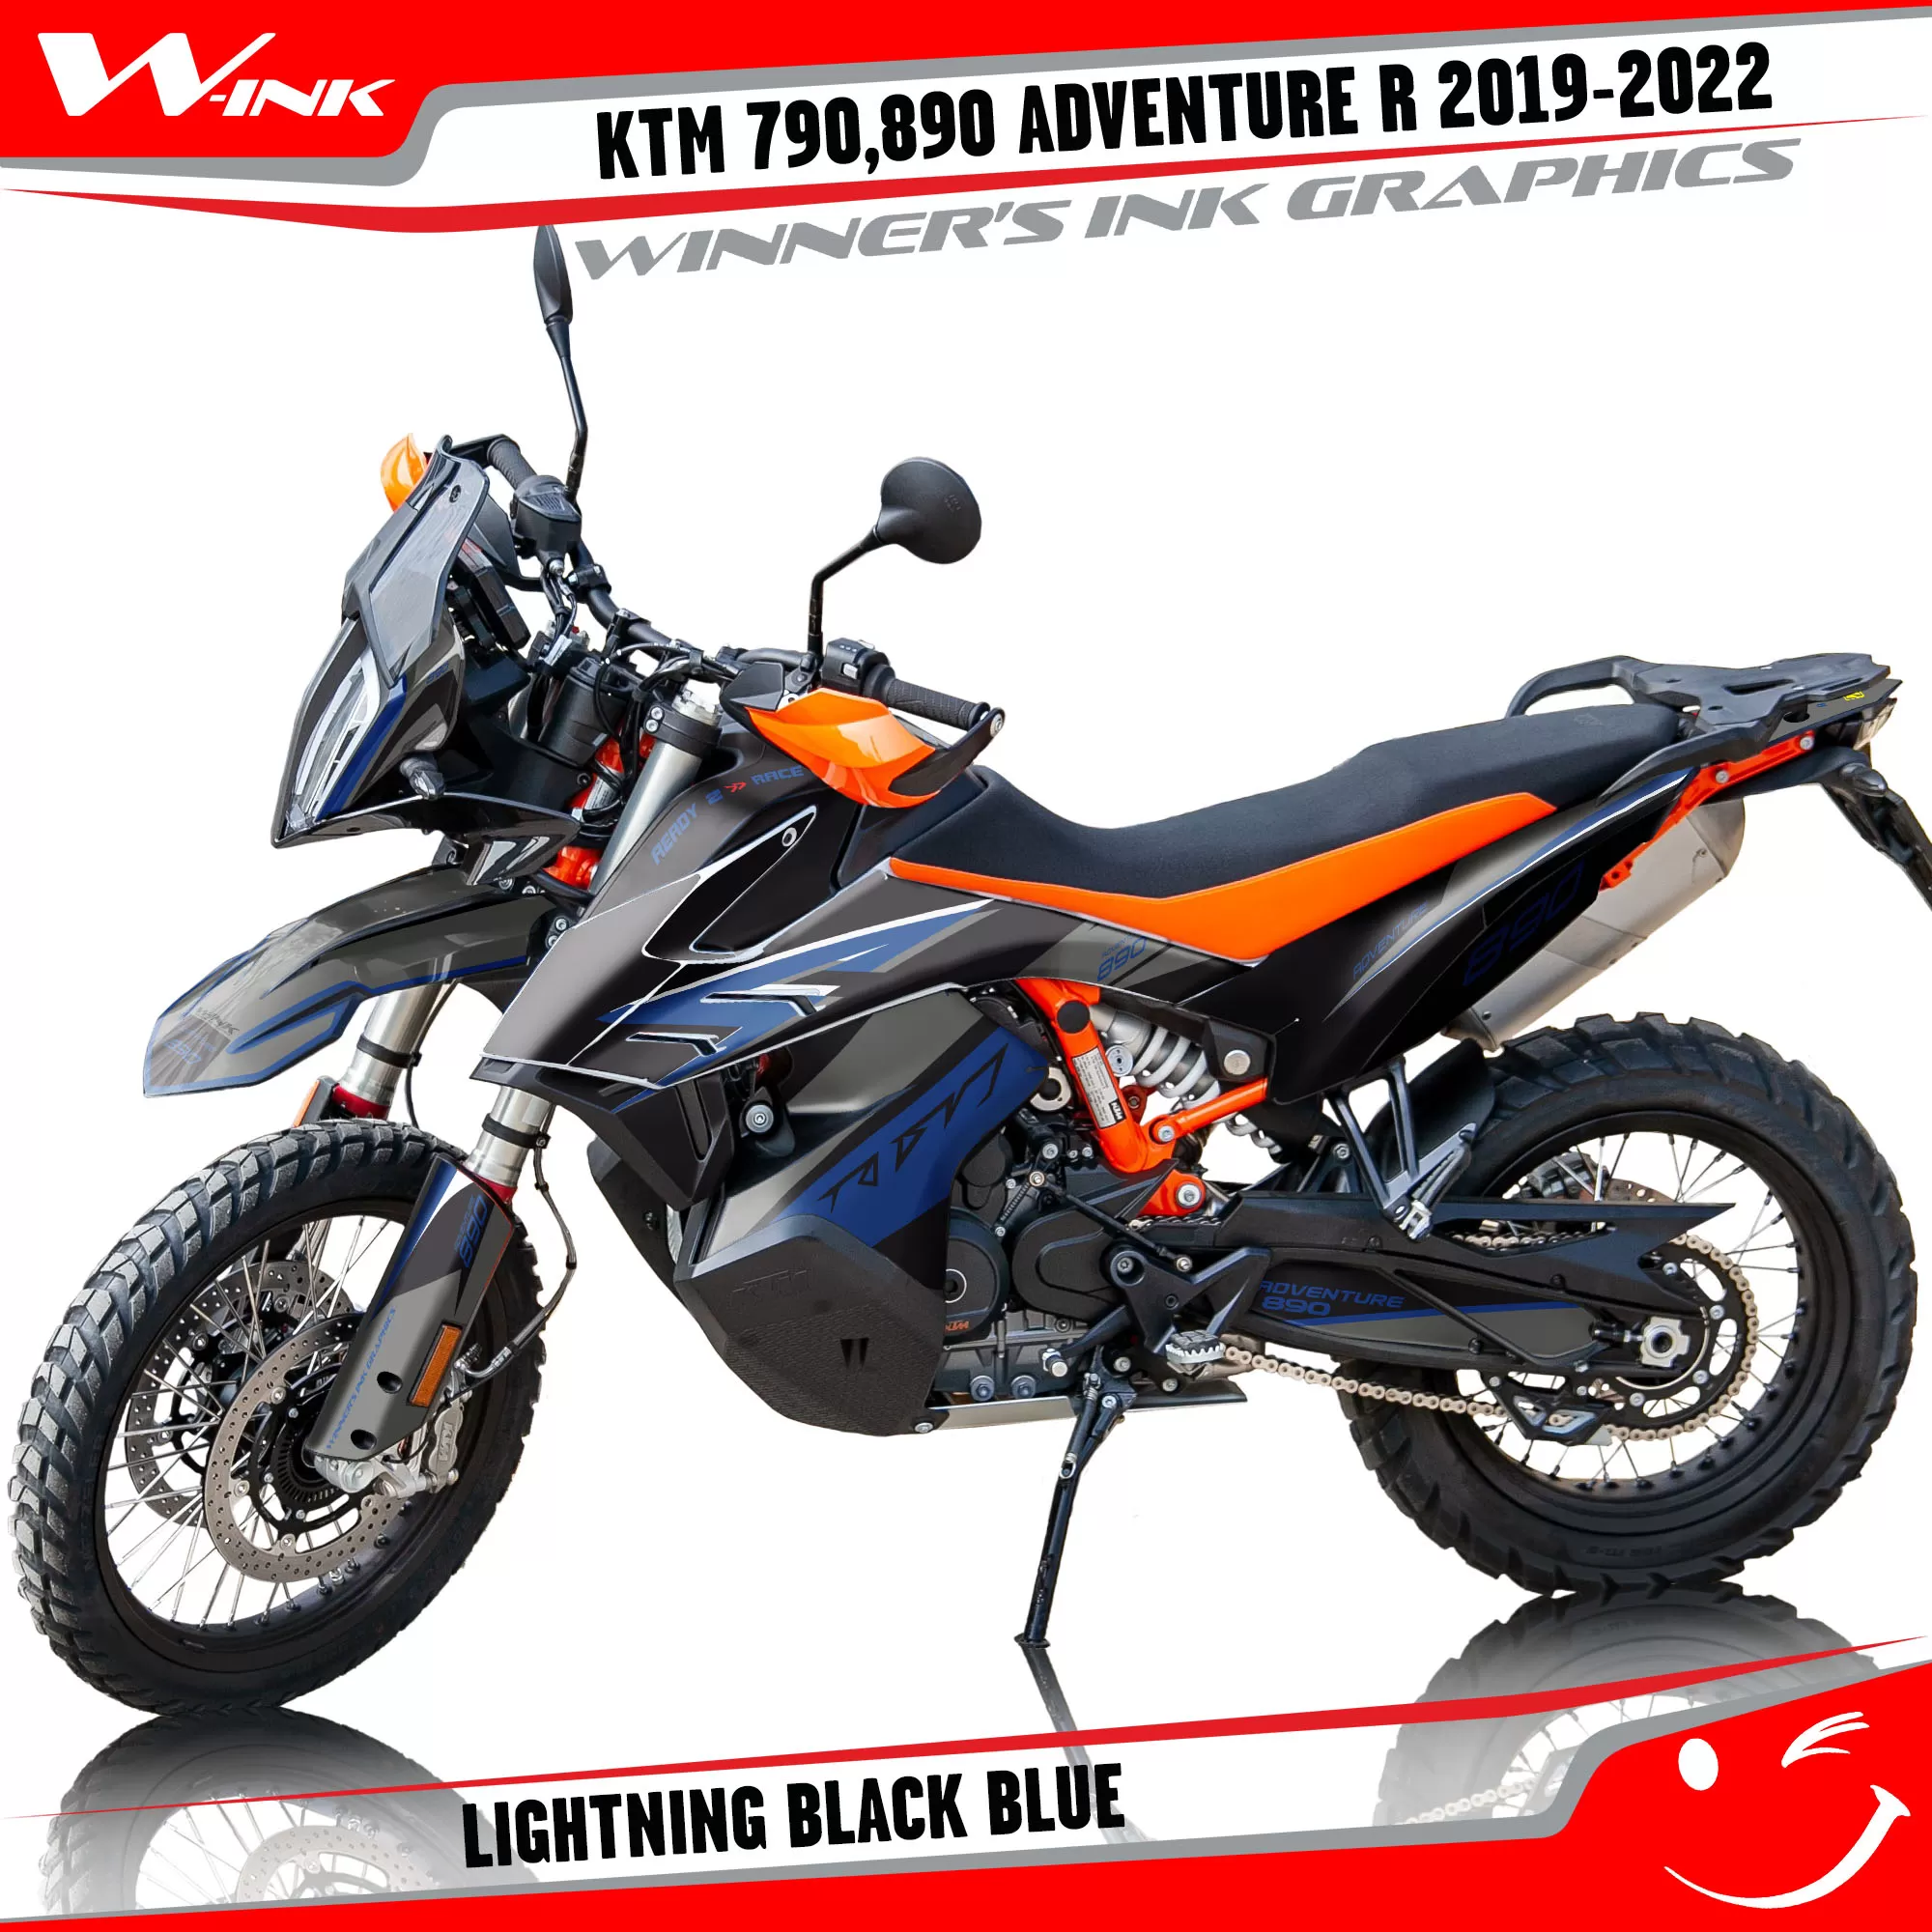 Adventure-R-790-890-2019-2020-2021-2022-graphics-kit-and-decals-with-designs-Lightning-Black-Blue